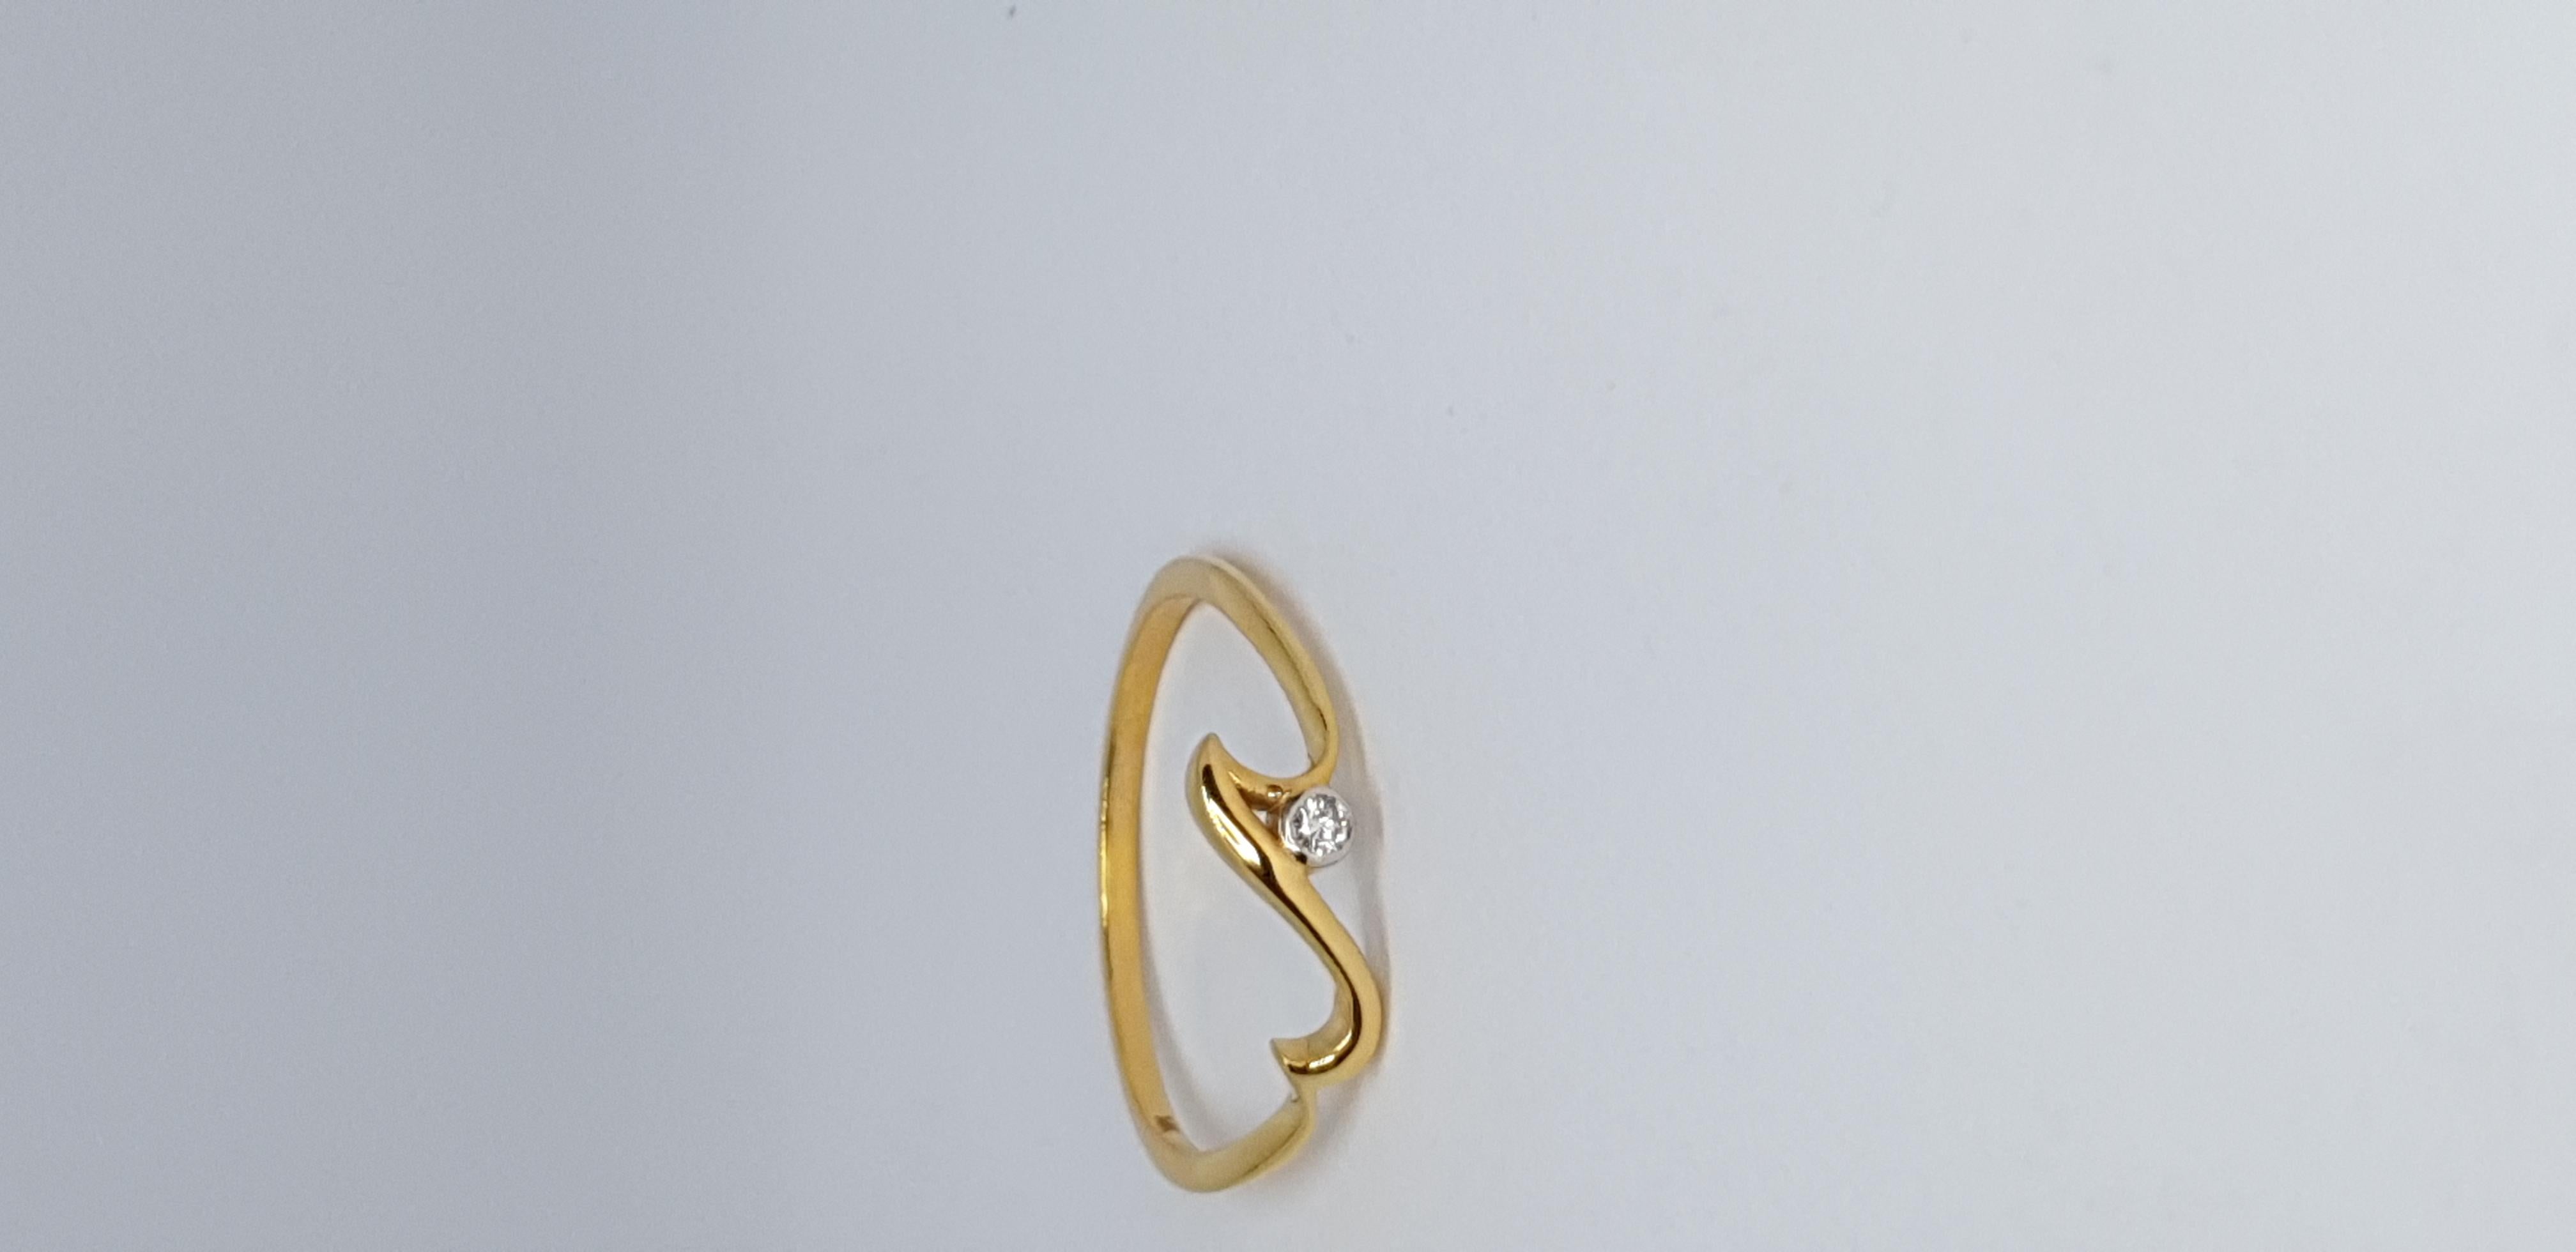 For Sale:  Natural Diamond Wave Ring 14K Solid Gold Dainty Ocean Lover Jewelry Gift. 20